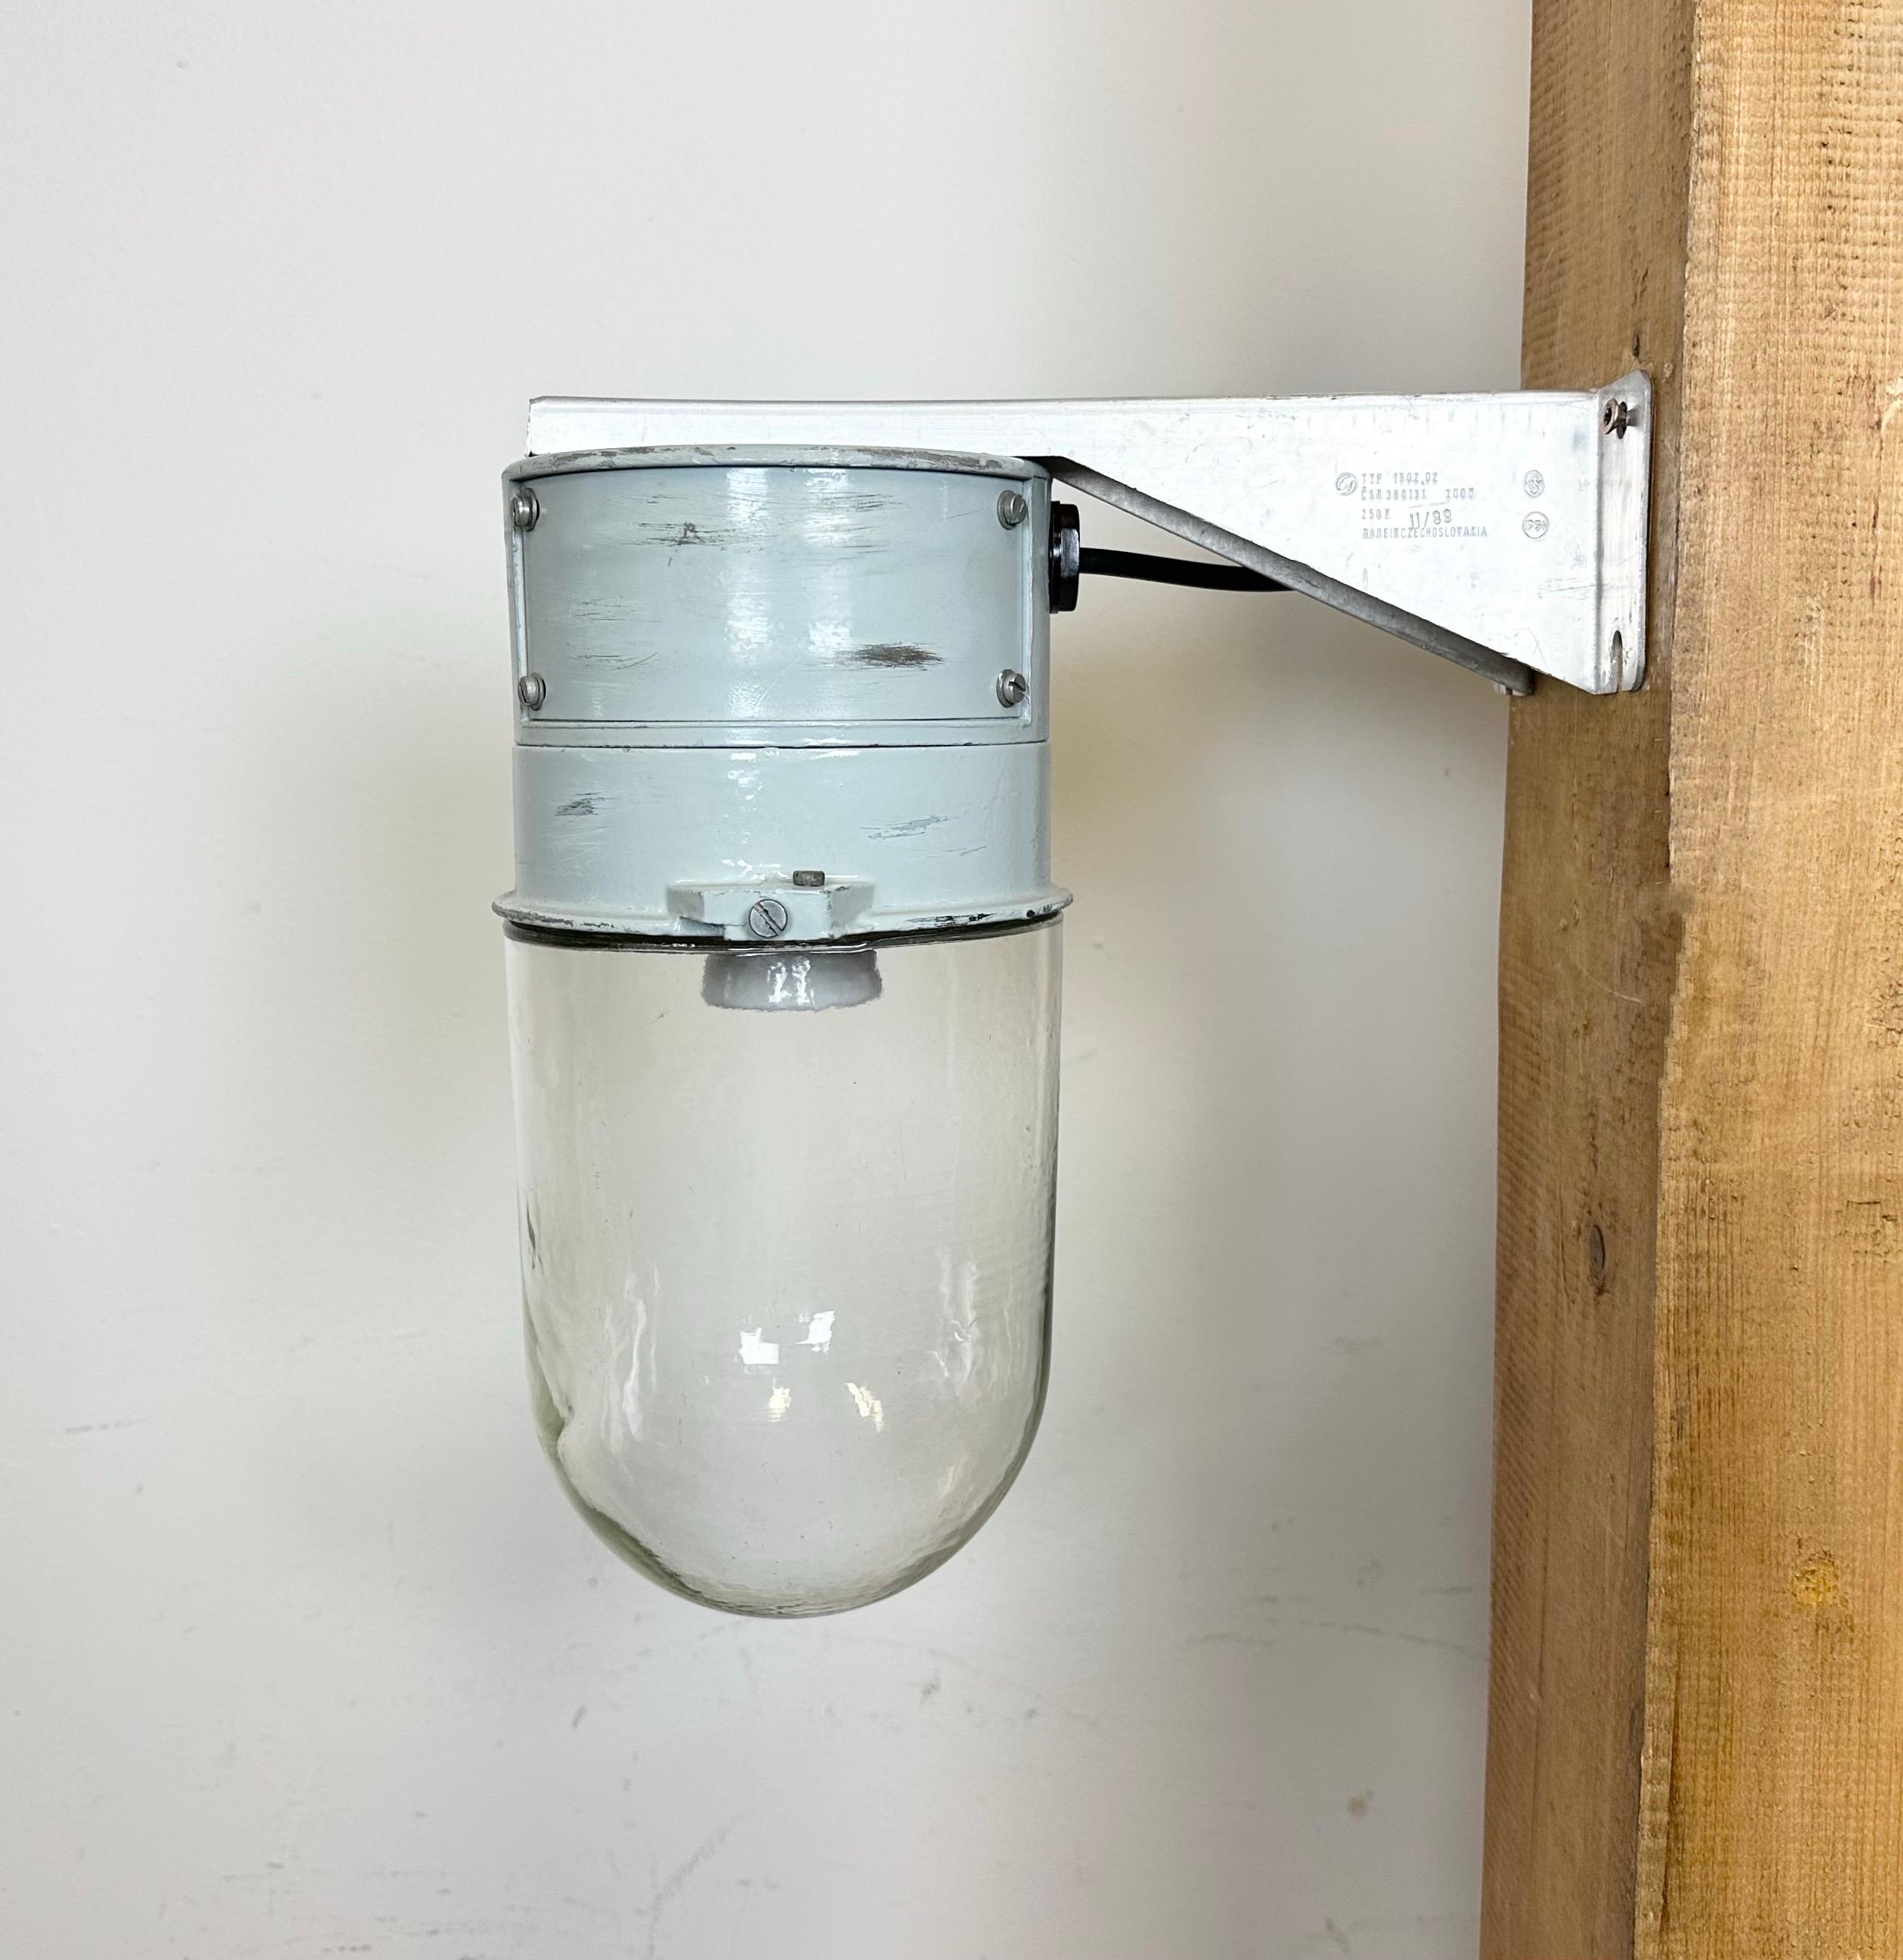 This Industrial wall light was made by Elektrosvit in former Czechoslovakia during the 1970s. It features a cast aluminium wall mounting and a clear glass cover. New porcelain socket requires standard E 27/ E26 light bulbs. New wire. The weight of